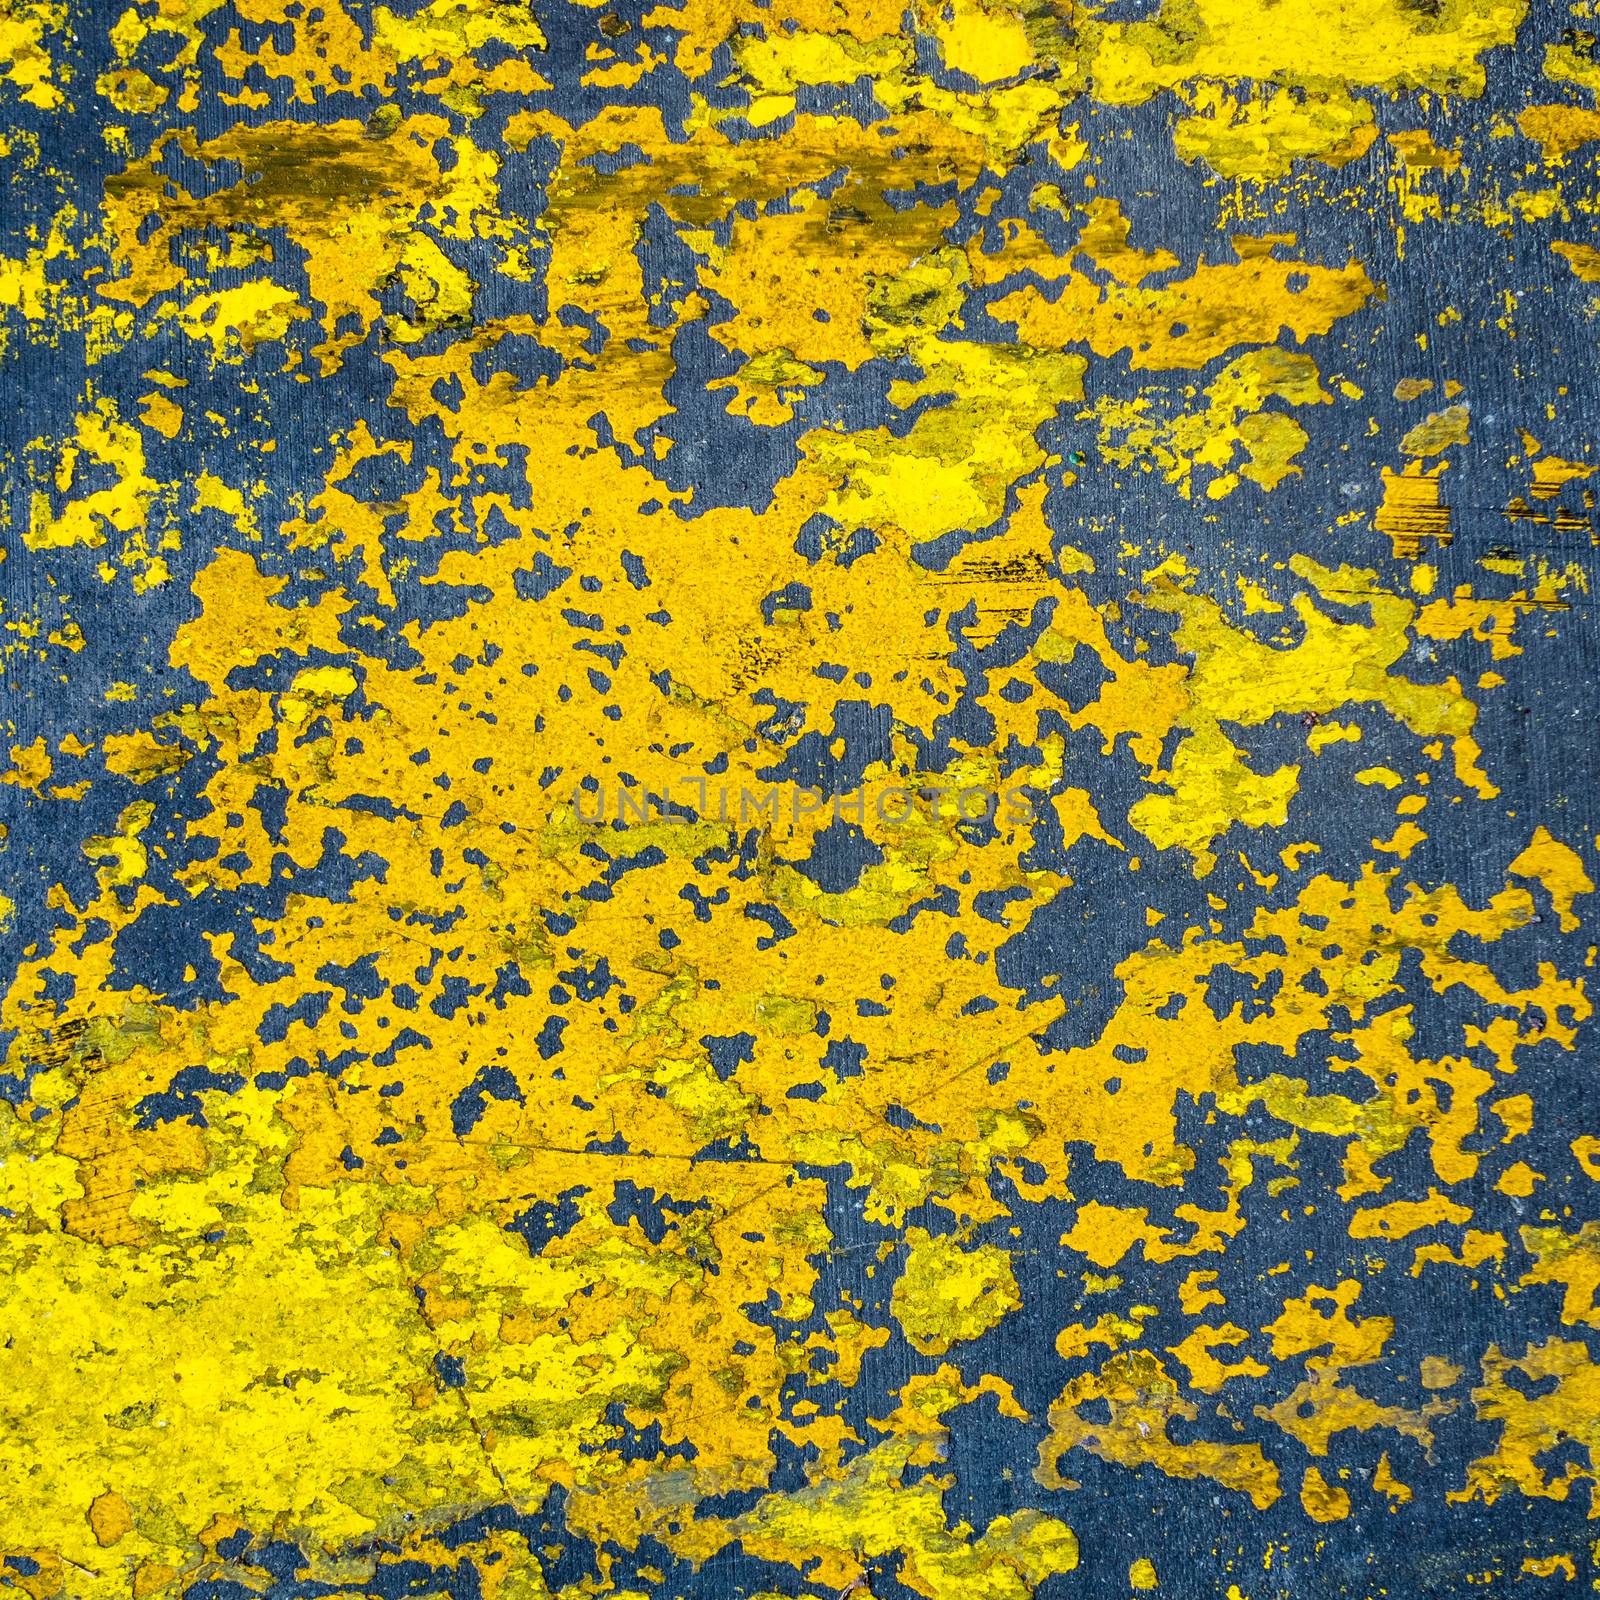 Grungy yellow painted cement floor texture